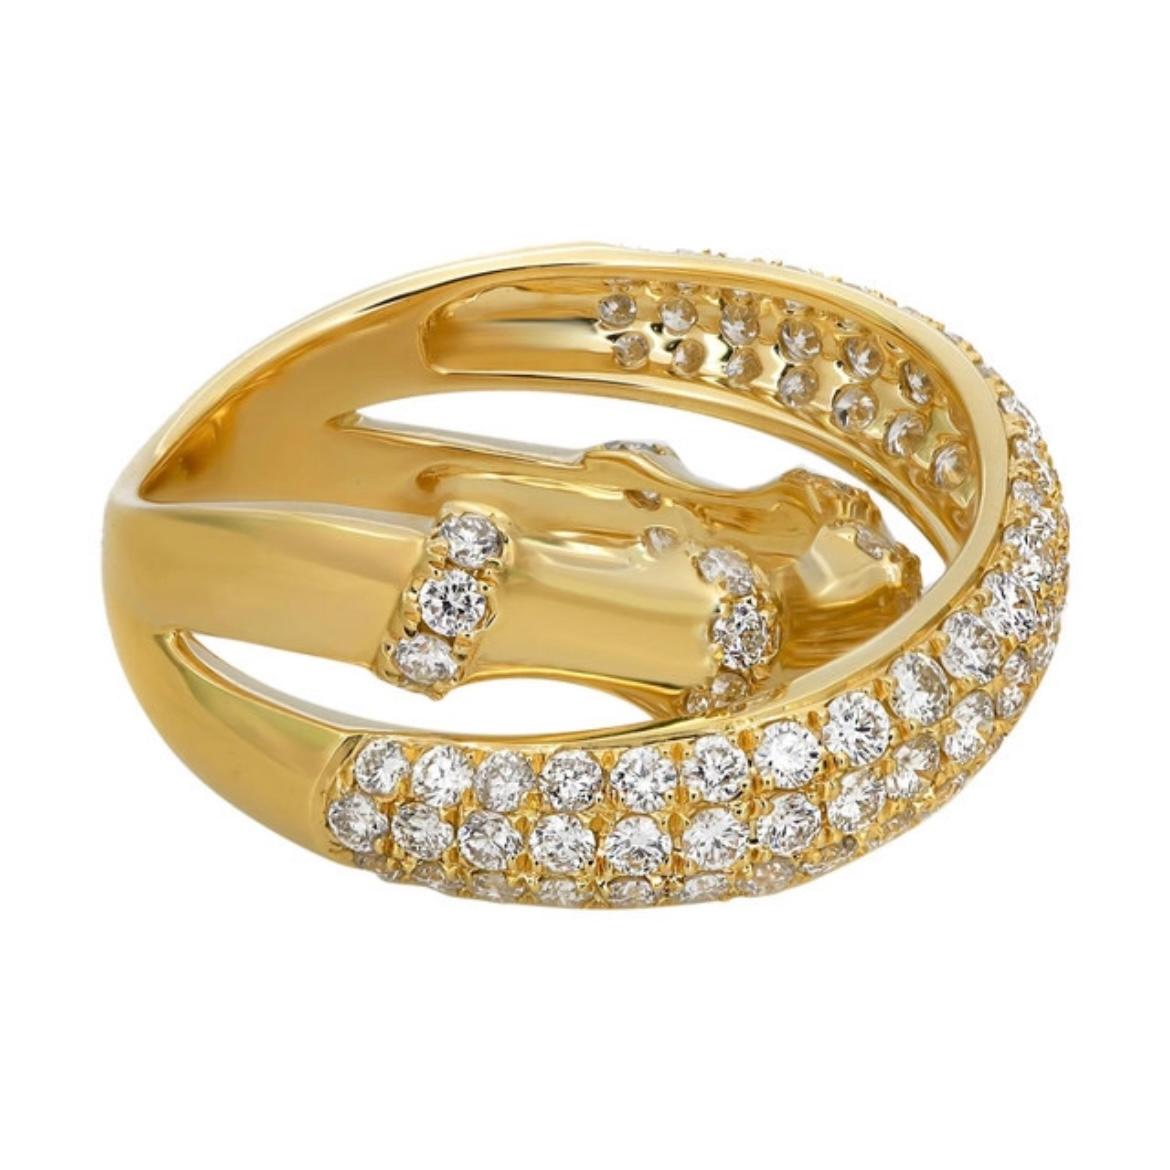 For Sale:  Elizabeth Fine Jewelry 1.71 Carat Diamond Crossover Ring in 18K Yellow Gold  4